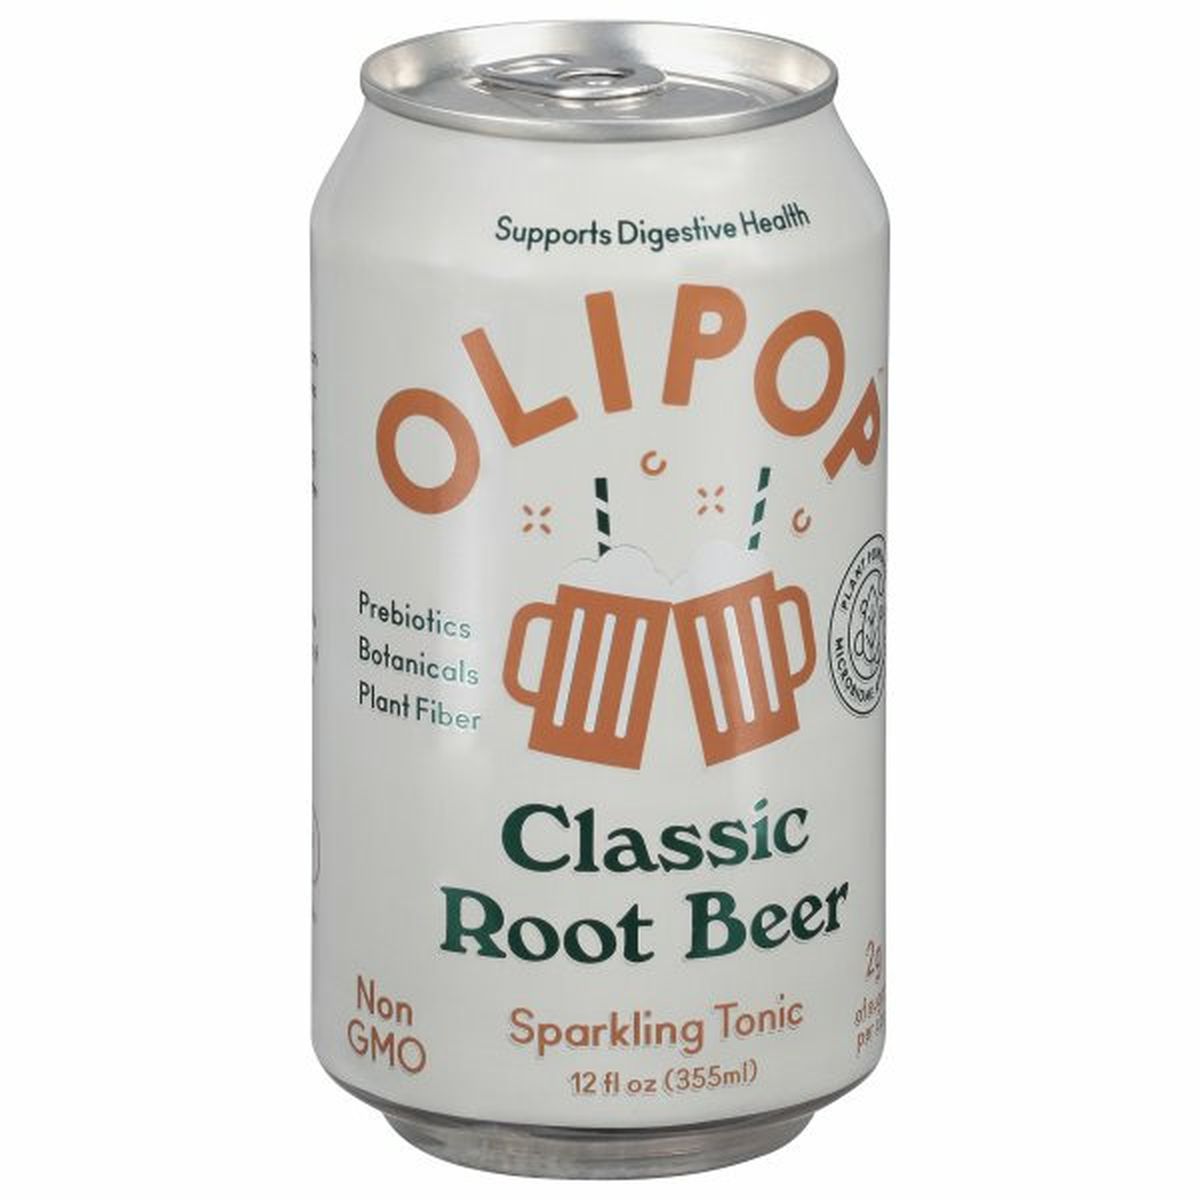 Calories in Olipop Sparkling Tonic, Classic Root Beer